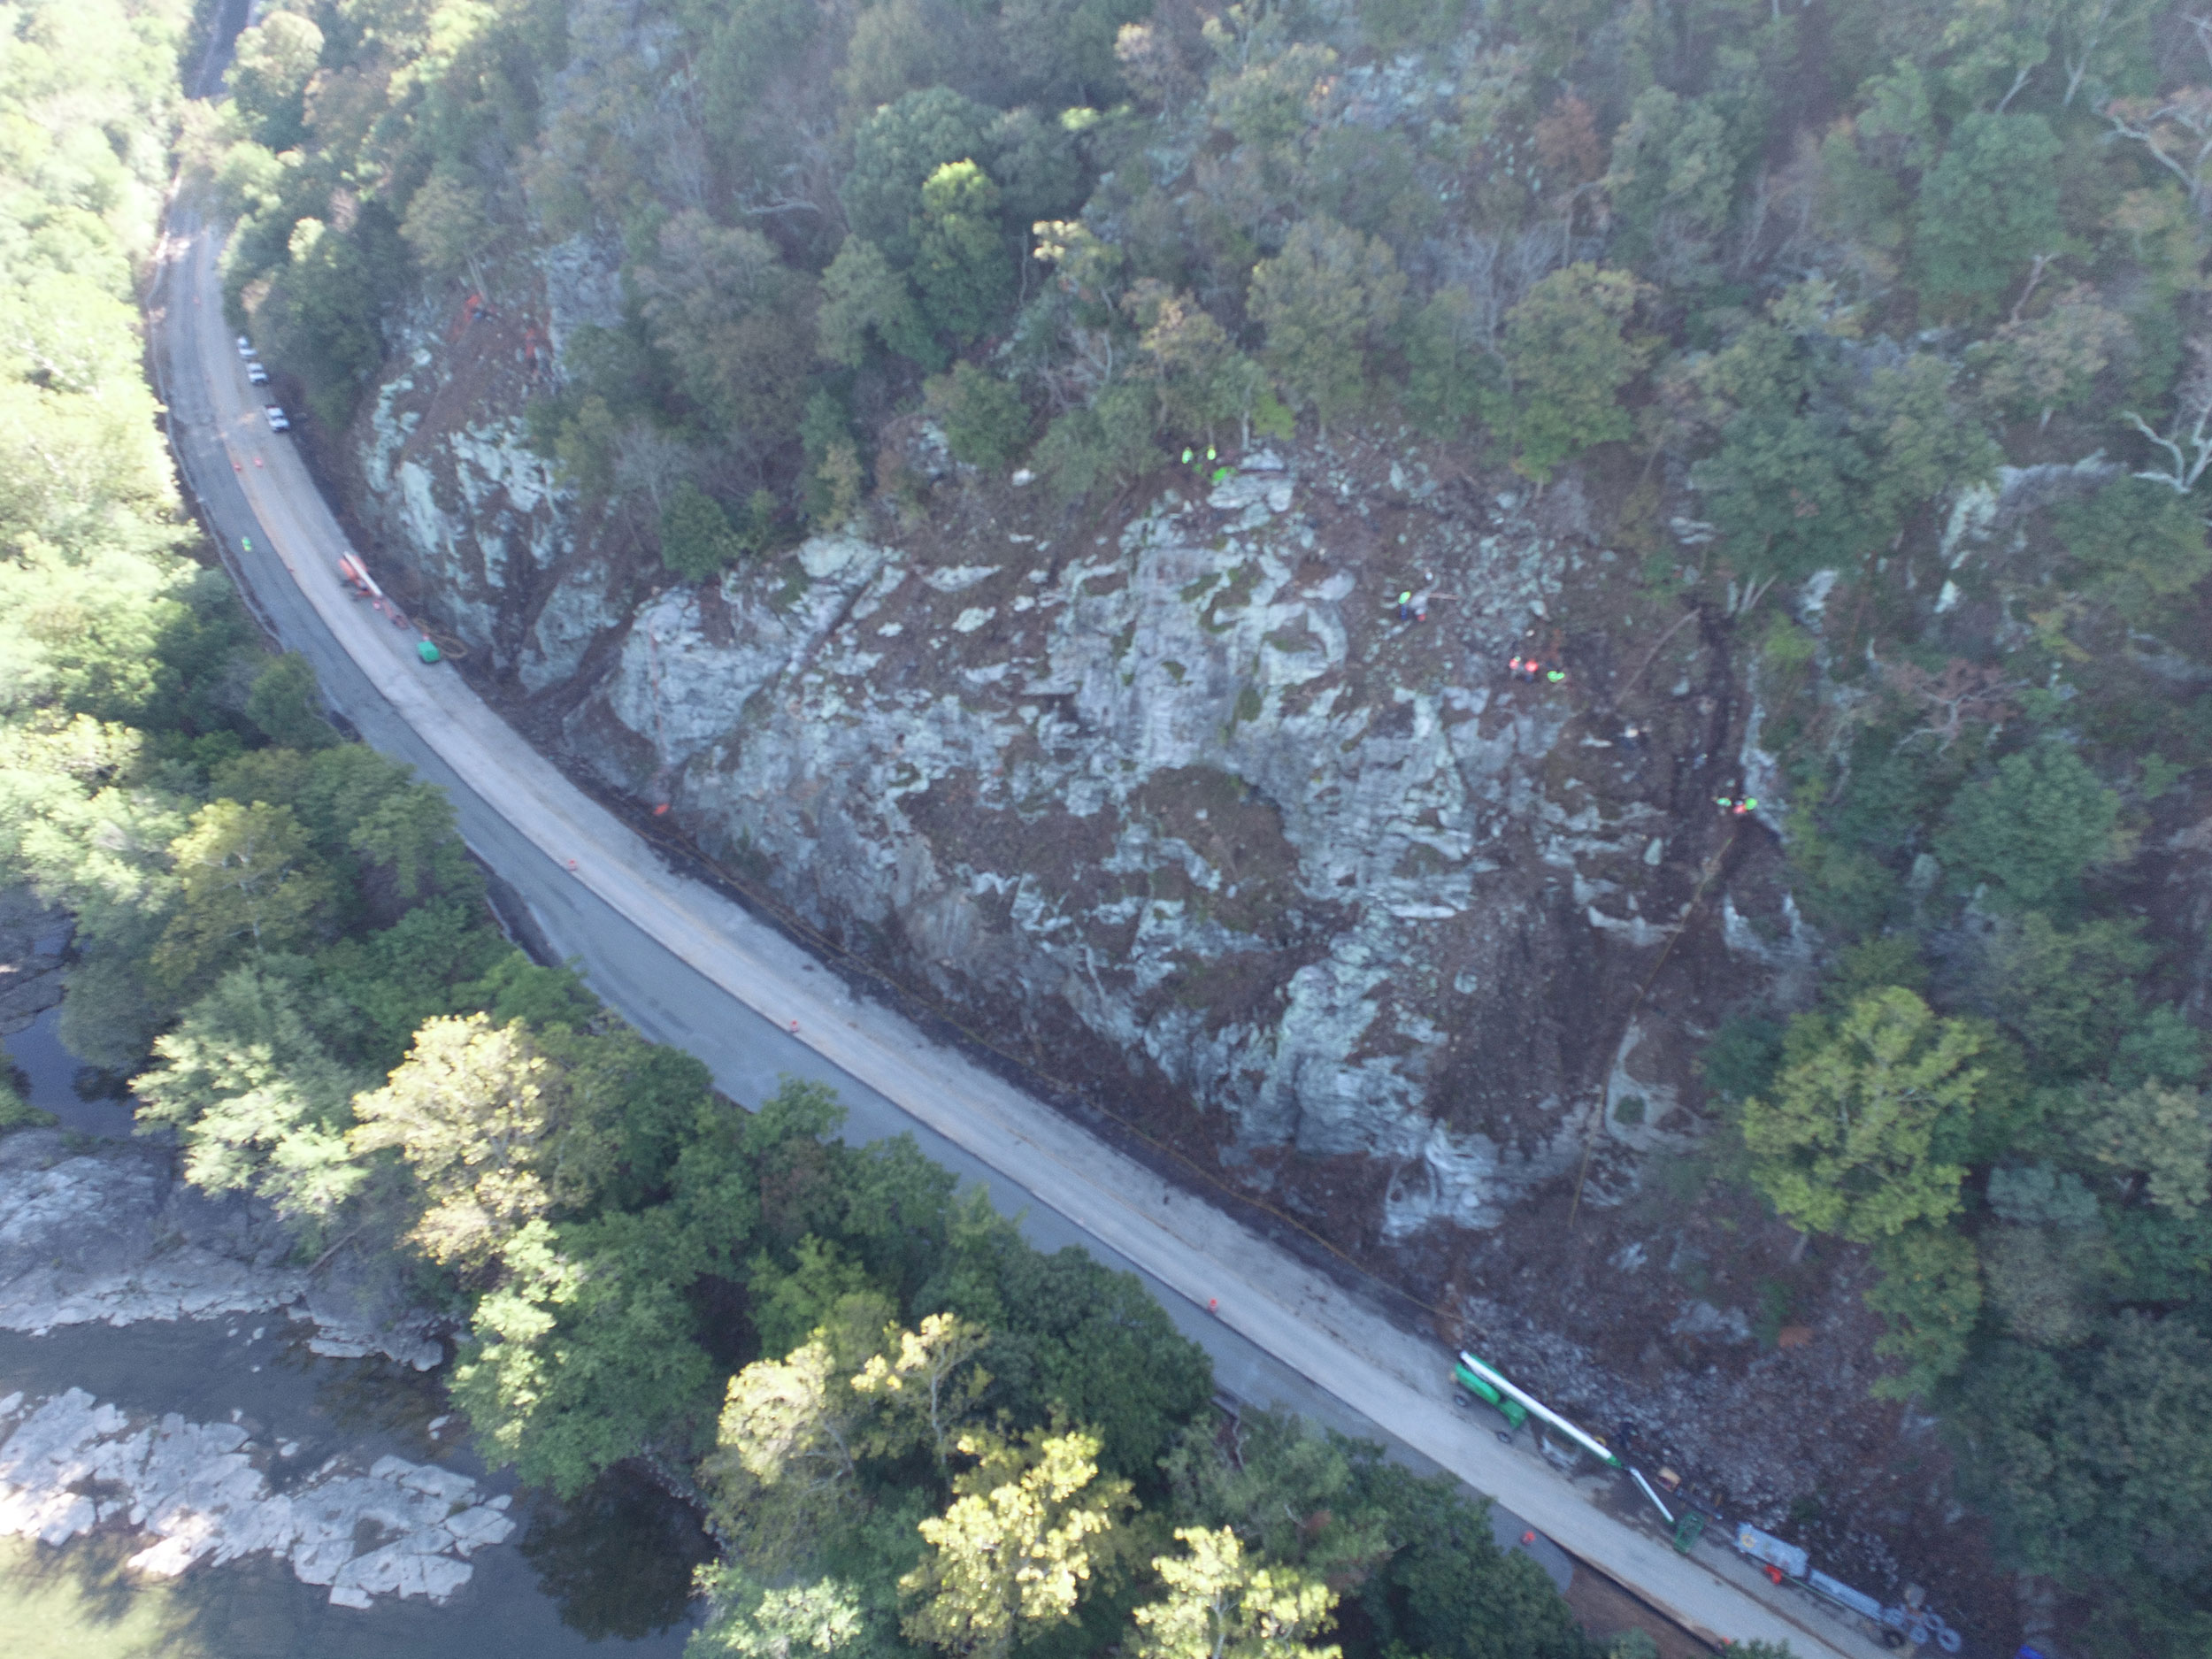 First step in mitigating a rockfall area includes removing loose or possibly unstable existing rock from the surface.  Here we can see crews suspended on the slope, using prybars and hand tools to bring down those rocks.